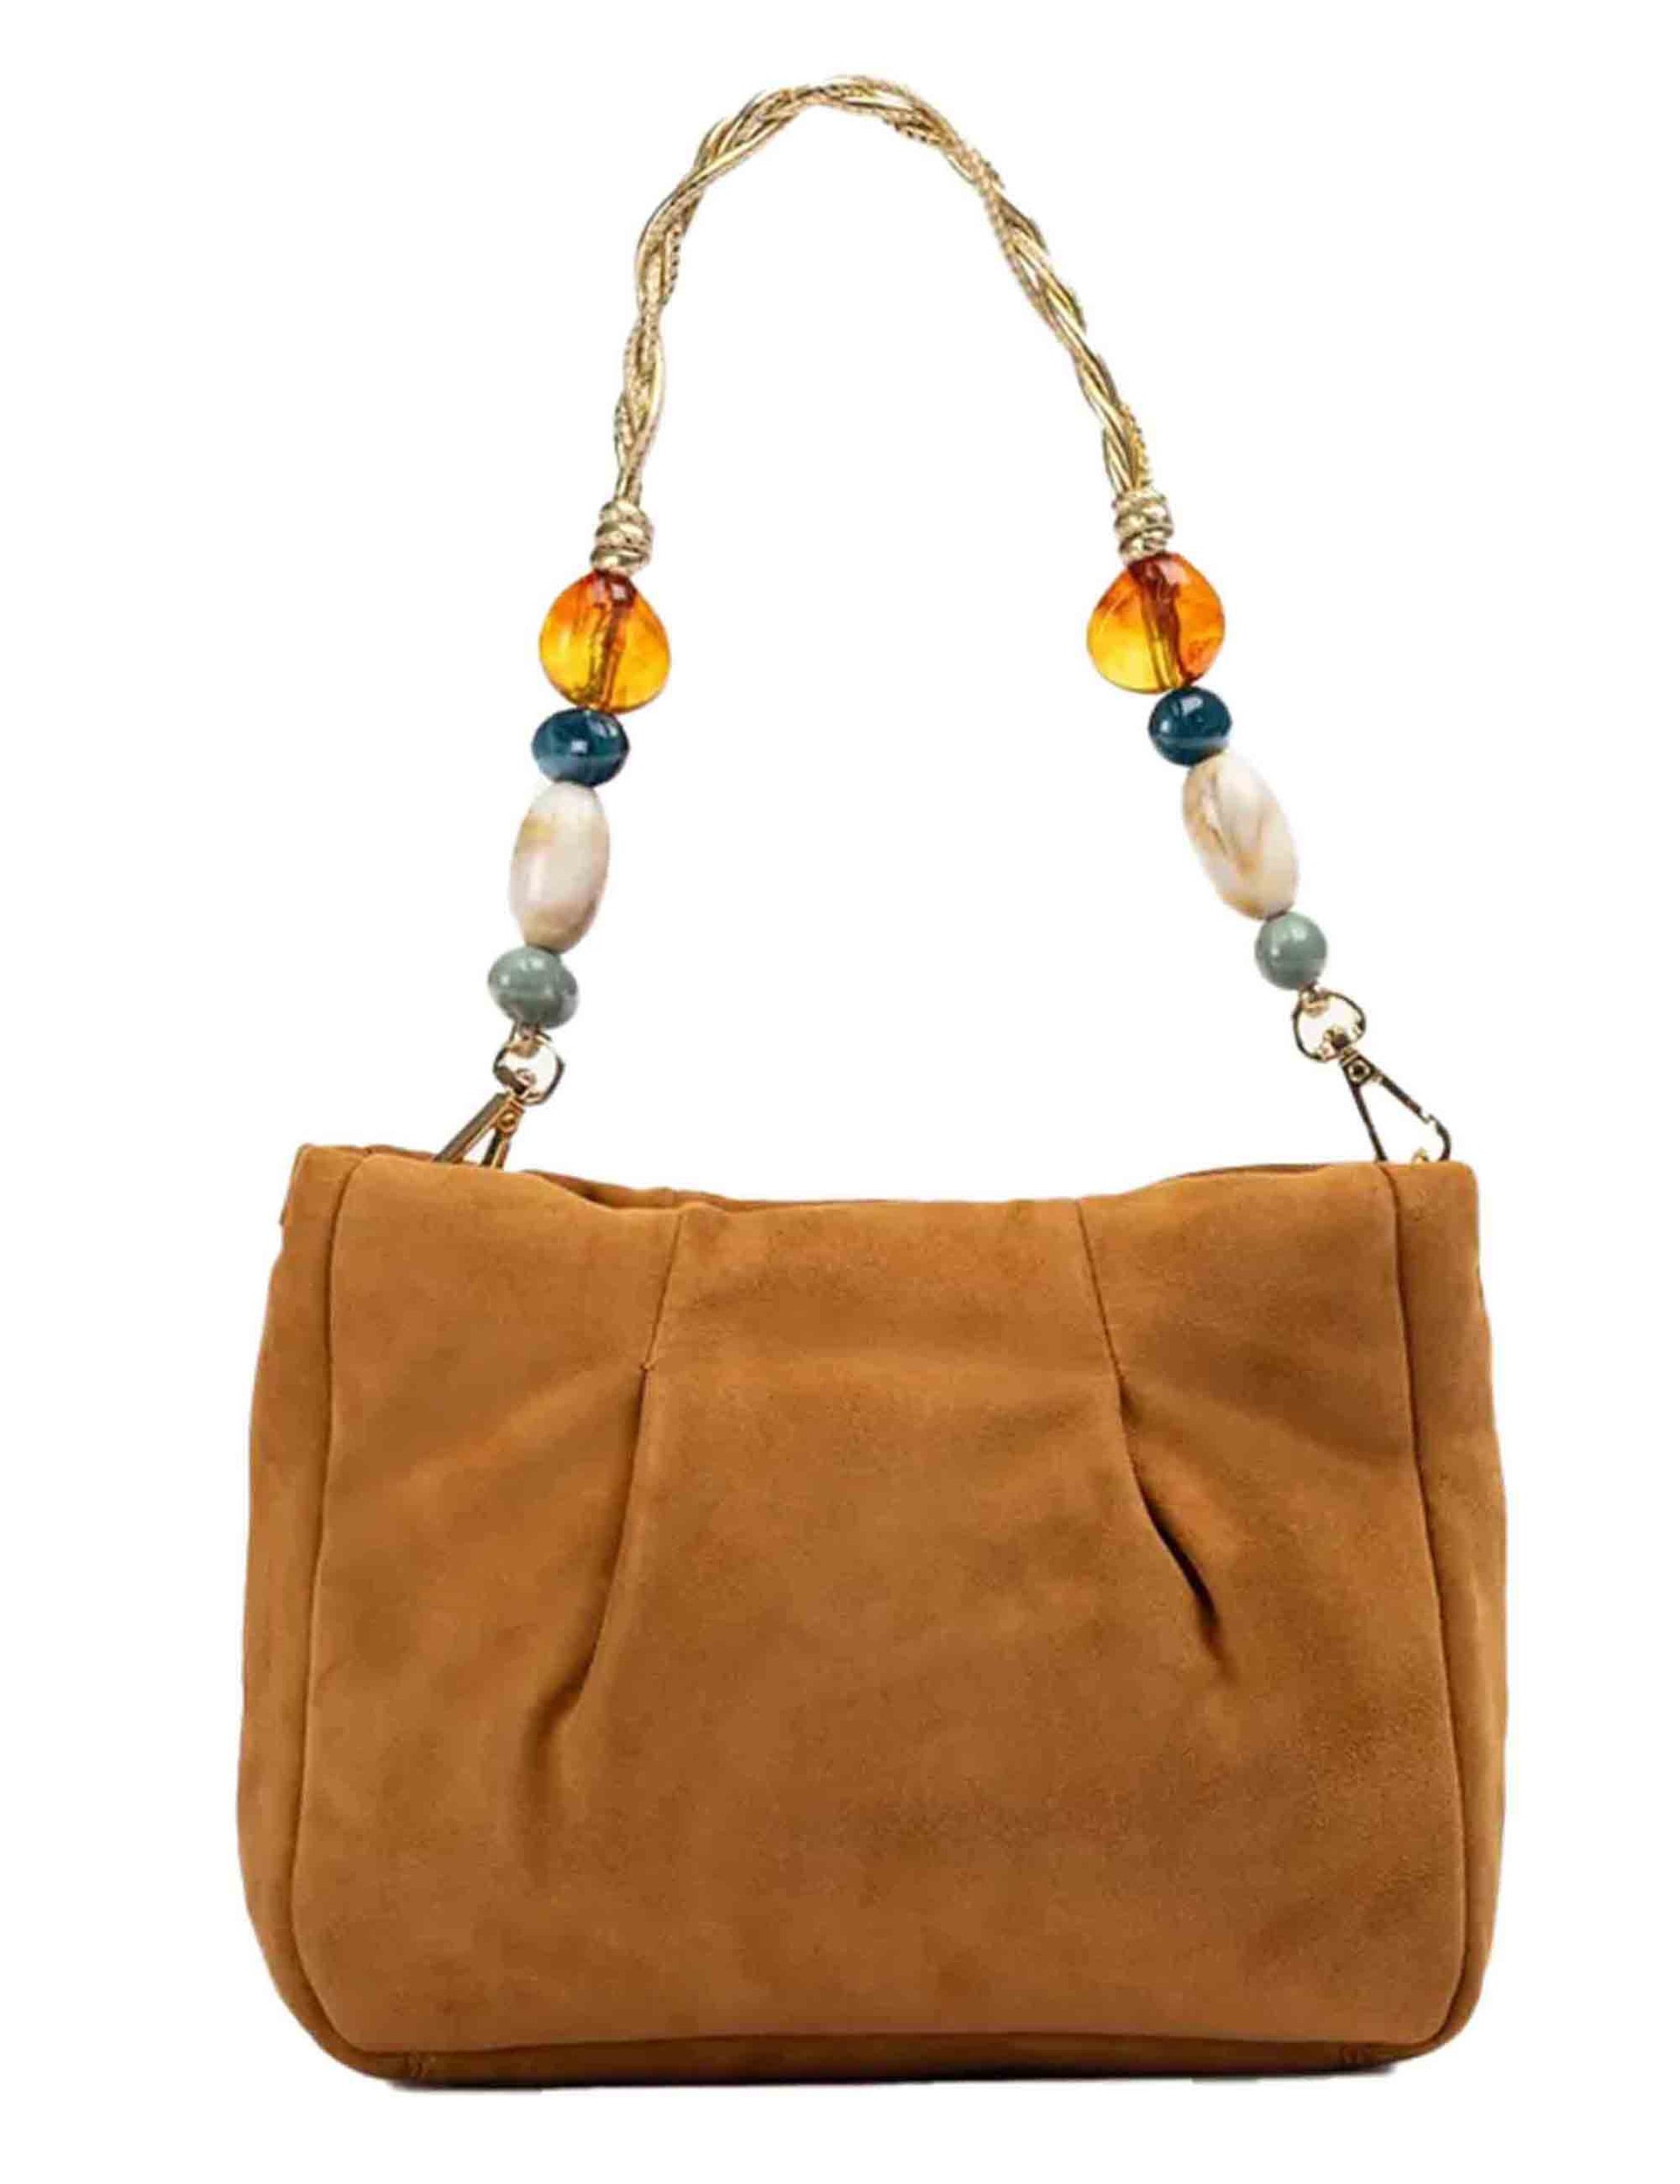 Women's shoulder bags in leather suede